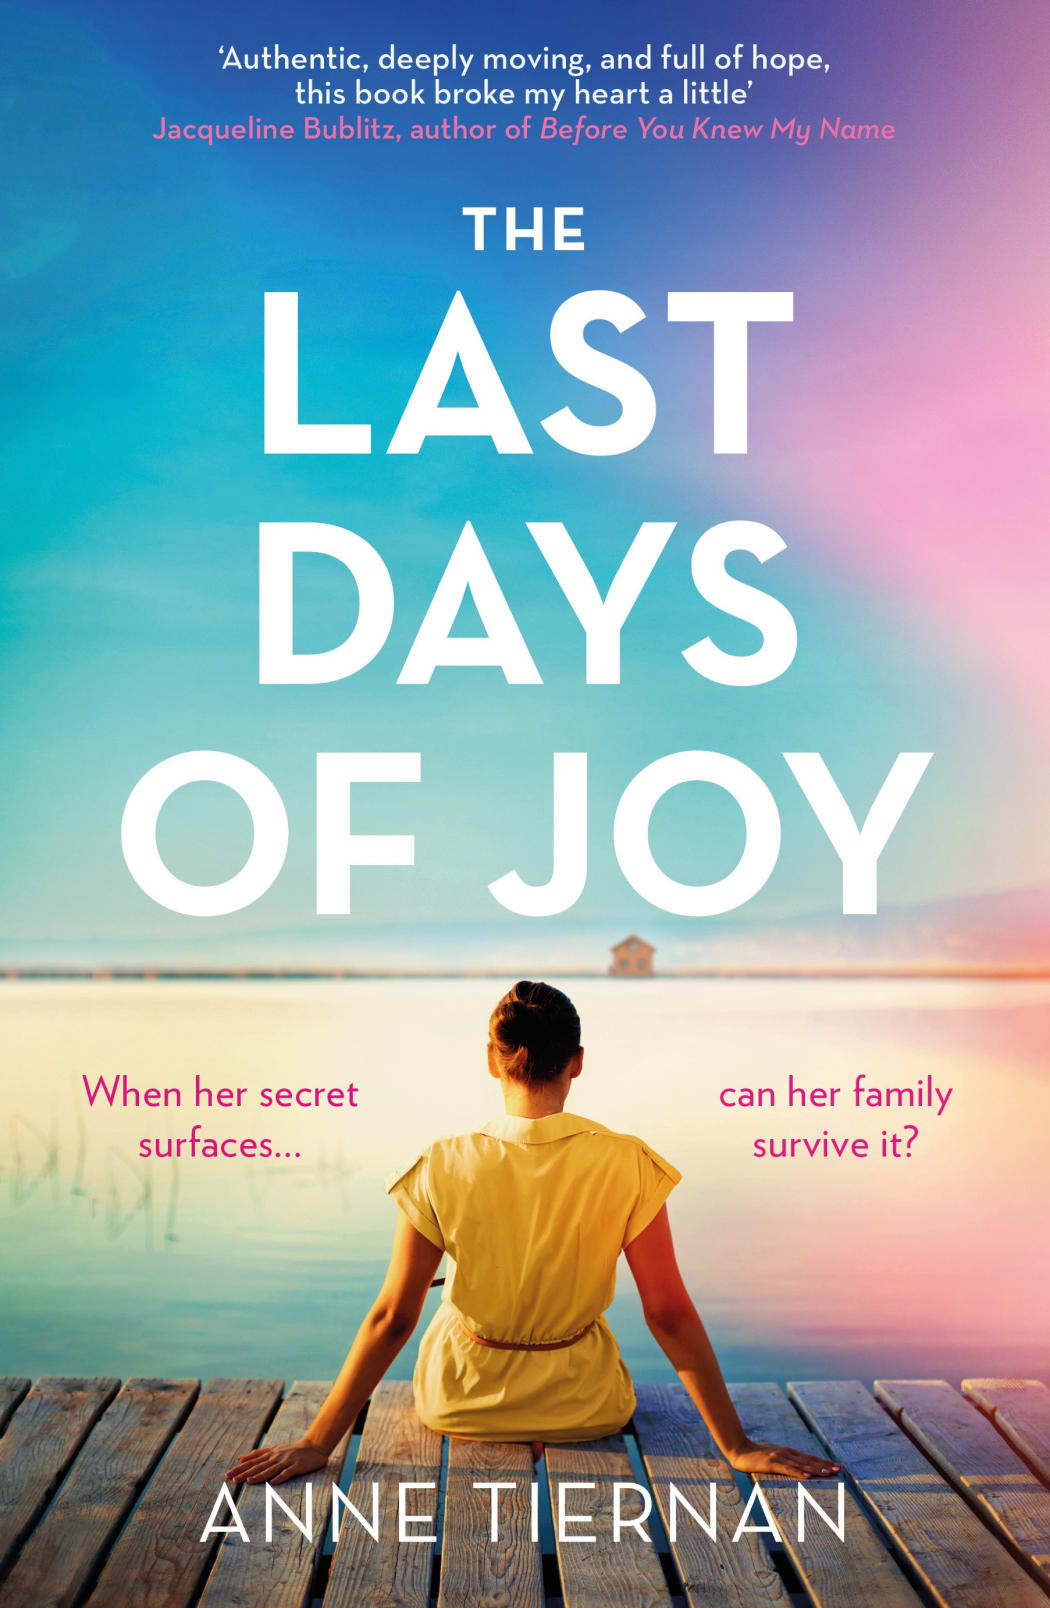 The Last Days of Joy book cover